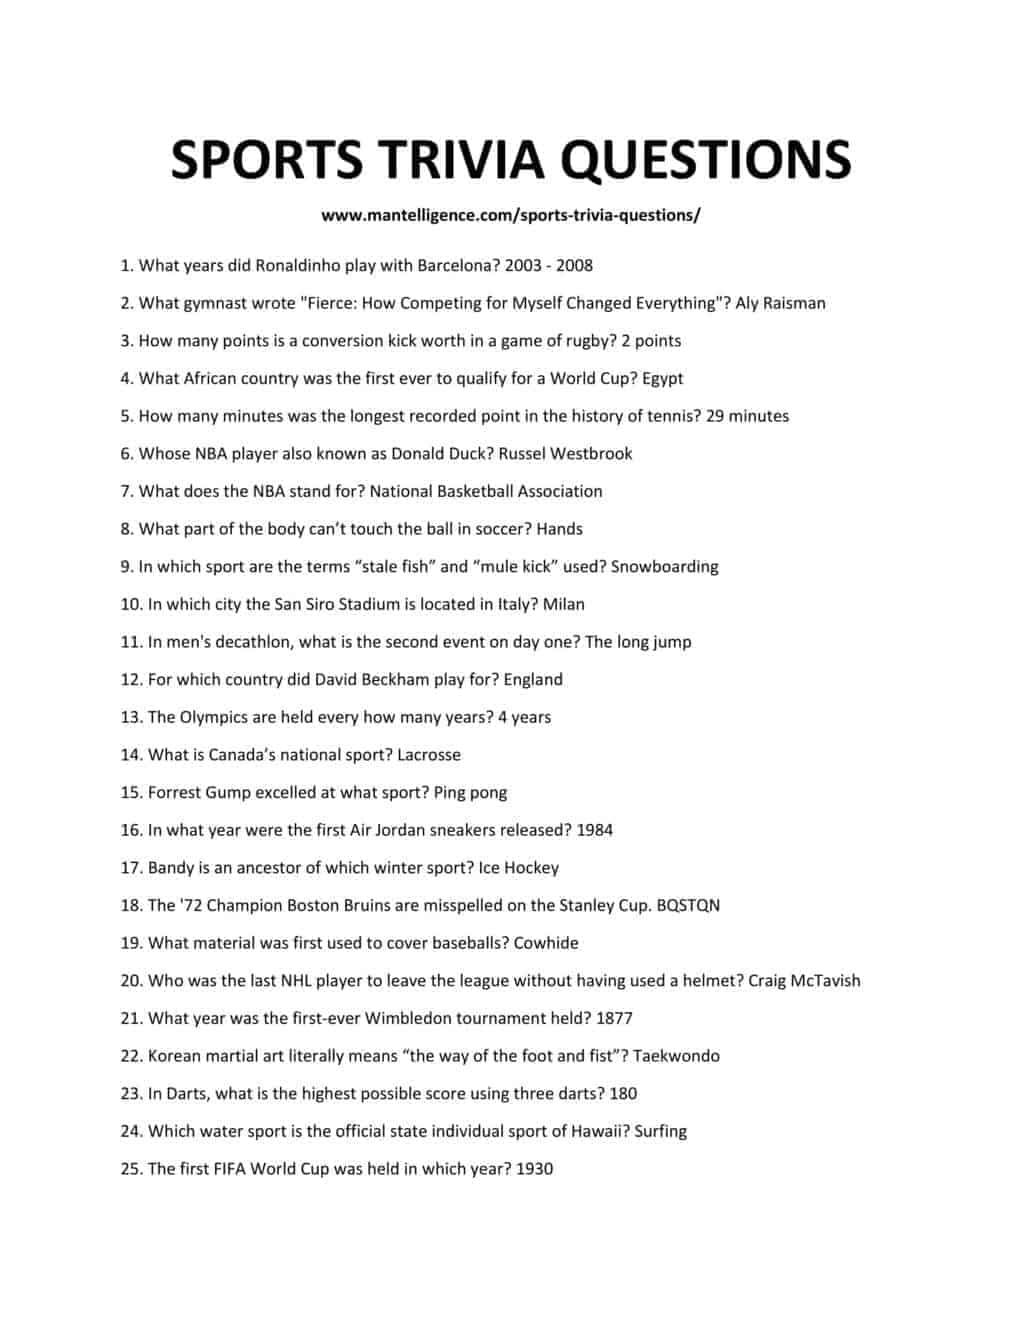 Downloadable and printable list of sports trivia questions as as jpg or pdf